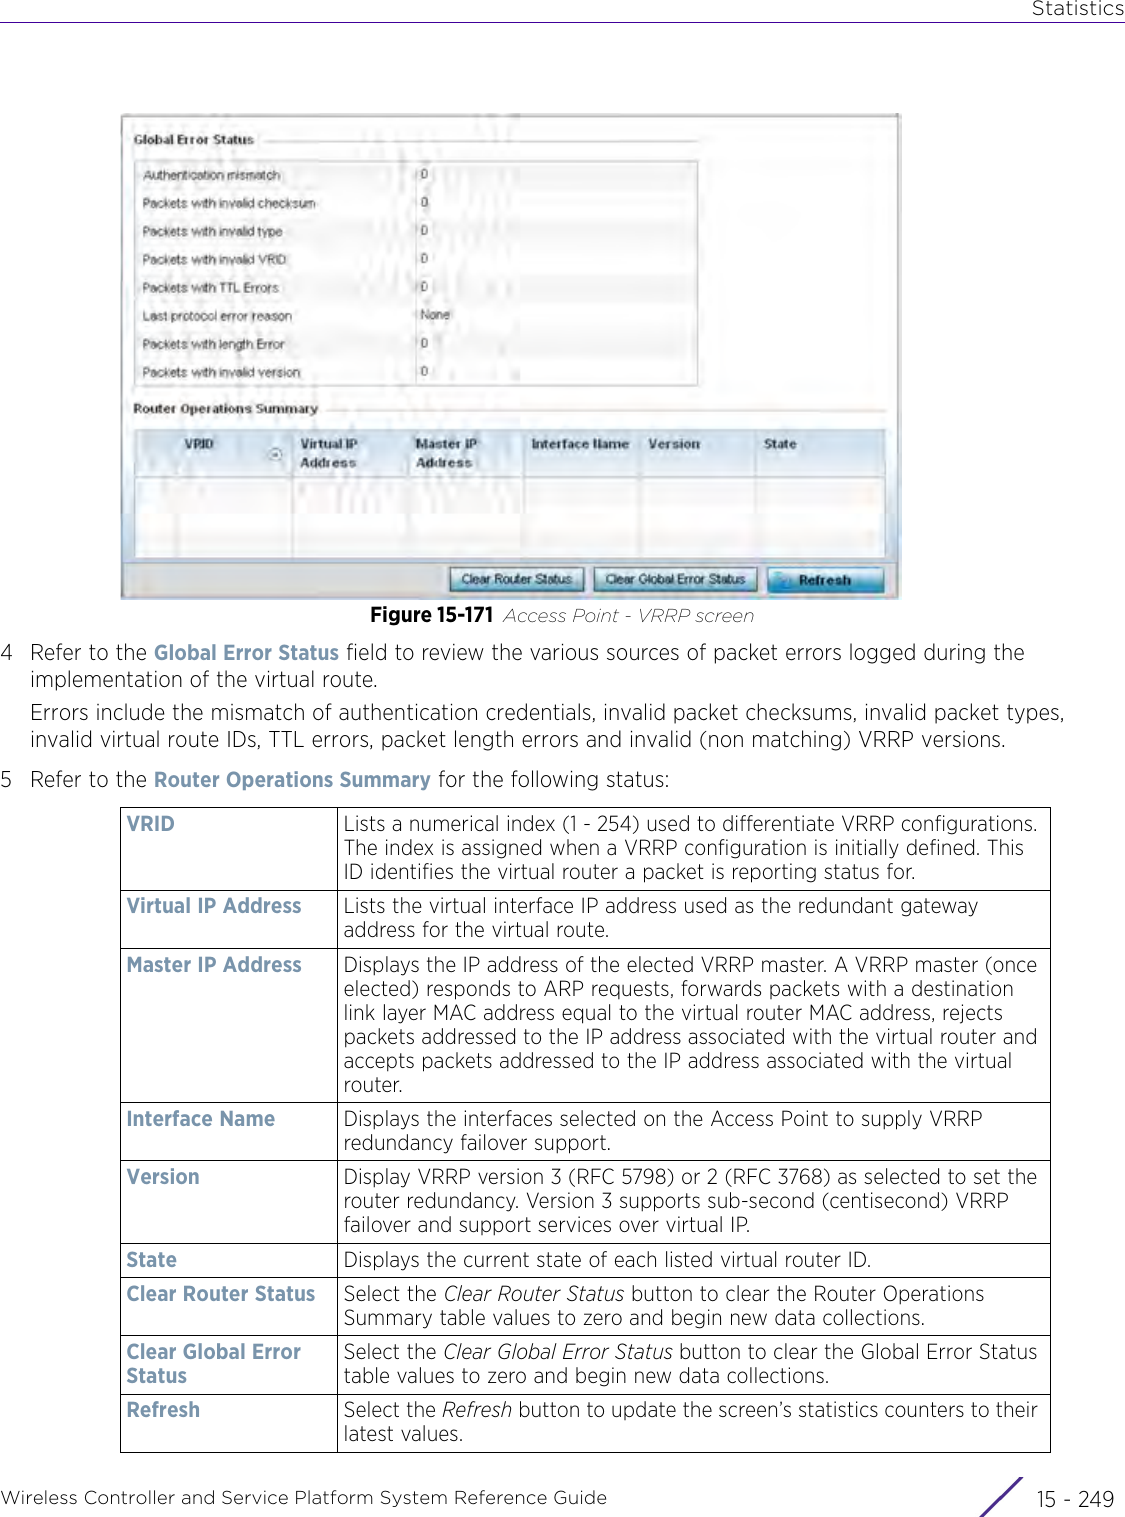 StatisticsWireless Controller and Service Platform System Reference Guide 15 - 249Figure 15-171 Access Point - VRRP screen4 Refer to the Global Error Status field to review the various sources of packet errors logged during the implementation of the virtual route.Errors include the mismatch of authentication credentials, invalid packet checksums, invalid packet types, invalid virtual route IDs, TTL errors, packet length errors and invalid (non matching) VRRP versions.5 Refer to the Router Operations Summary for the following status:VRID Lists a numerical index (1 - 254) used to differentiate VRRP configurations. The index is assigned when a VRRP configuration is initially defined. This ID identifies the virtual router a packet is reporting status for.Virtual IP Address Lists the virtual interface IP address used as the redundant gateway address for the virtual route.Master IP Address Displays the IP address of the elected VRRP master. A VRRP master (once elected) responds to ARP requests, forwards packets with a destination link layer MAC address equal to the virtual router MAC address, rejects packets addressed to the IP address associated with the virtual router and accepts packets addressed to the IP address associated with the virtual router.Interface Name  Displays the interfaces selected on the Access Point to supply VRRP redundancy failover support.Version Display VRRP version 3 (RFC 5798) or 2 (RFC 3768) as selected to set the router redundancy. Version 3 supports sub-second (centisecond) VRRP failover and support services over virtual IP. State Displays the current state of each listed virtual router ID.Clear Router Status Select the Clear Router Status button to clear the Router Operations Summary table values to zero and begin new data collections.Clear Global Error StatusSelect the Clear Global Error Status button to clear the Global Error Status table values to zero and begin new data collections.Refresh Select the Refresh button to update the screen’s statistics counters to their latest values.